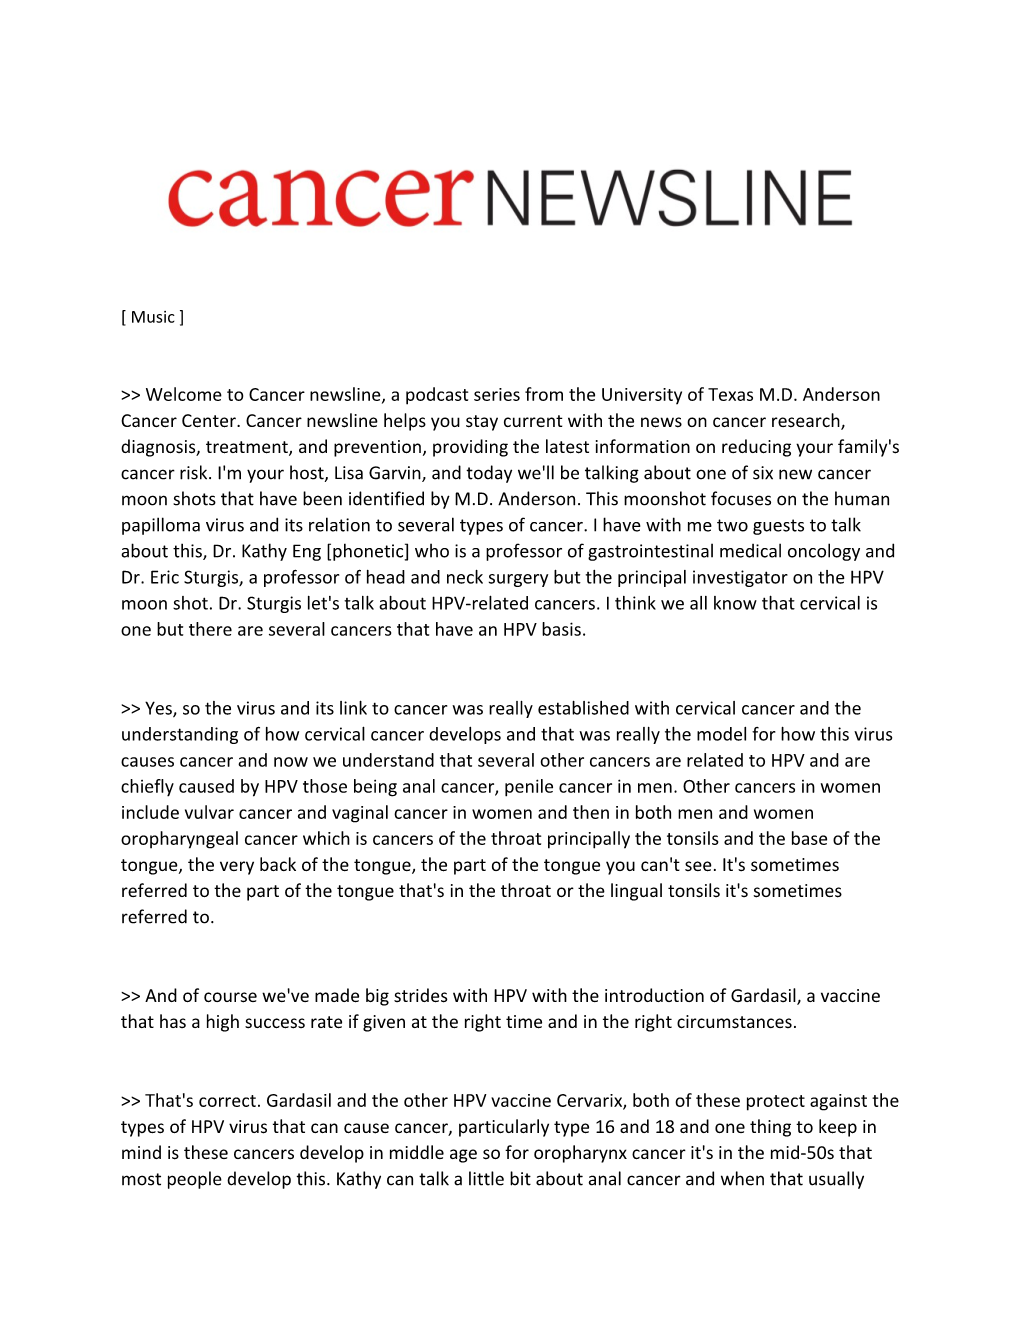 &gt; Welcome to Cancer Newsline, a Podcast Series from the University of Texas M.D. Anderson